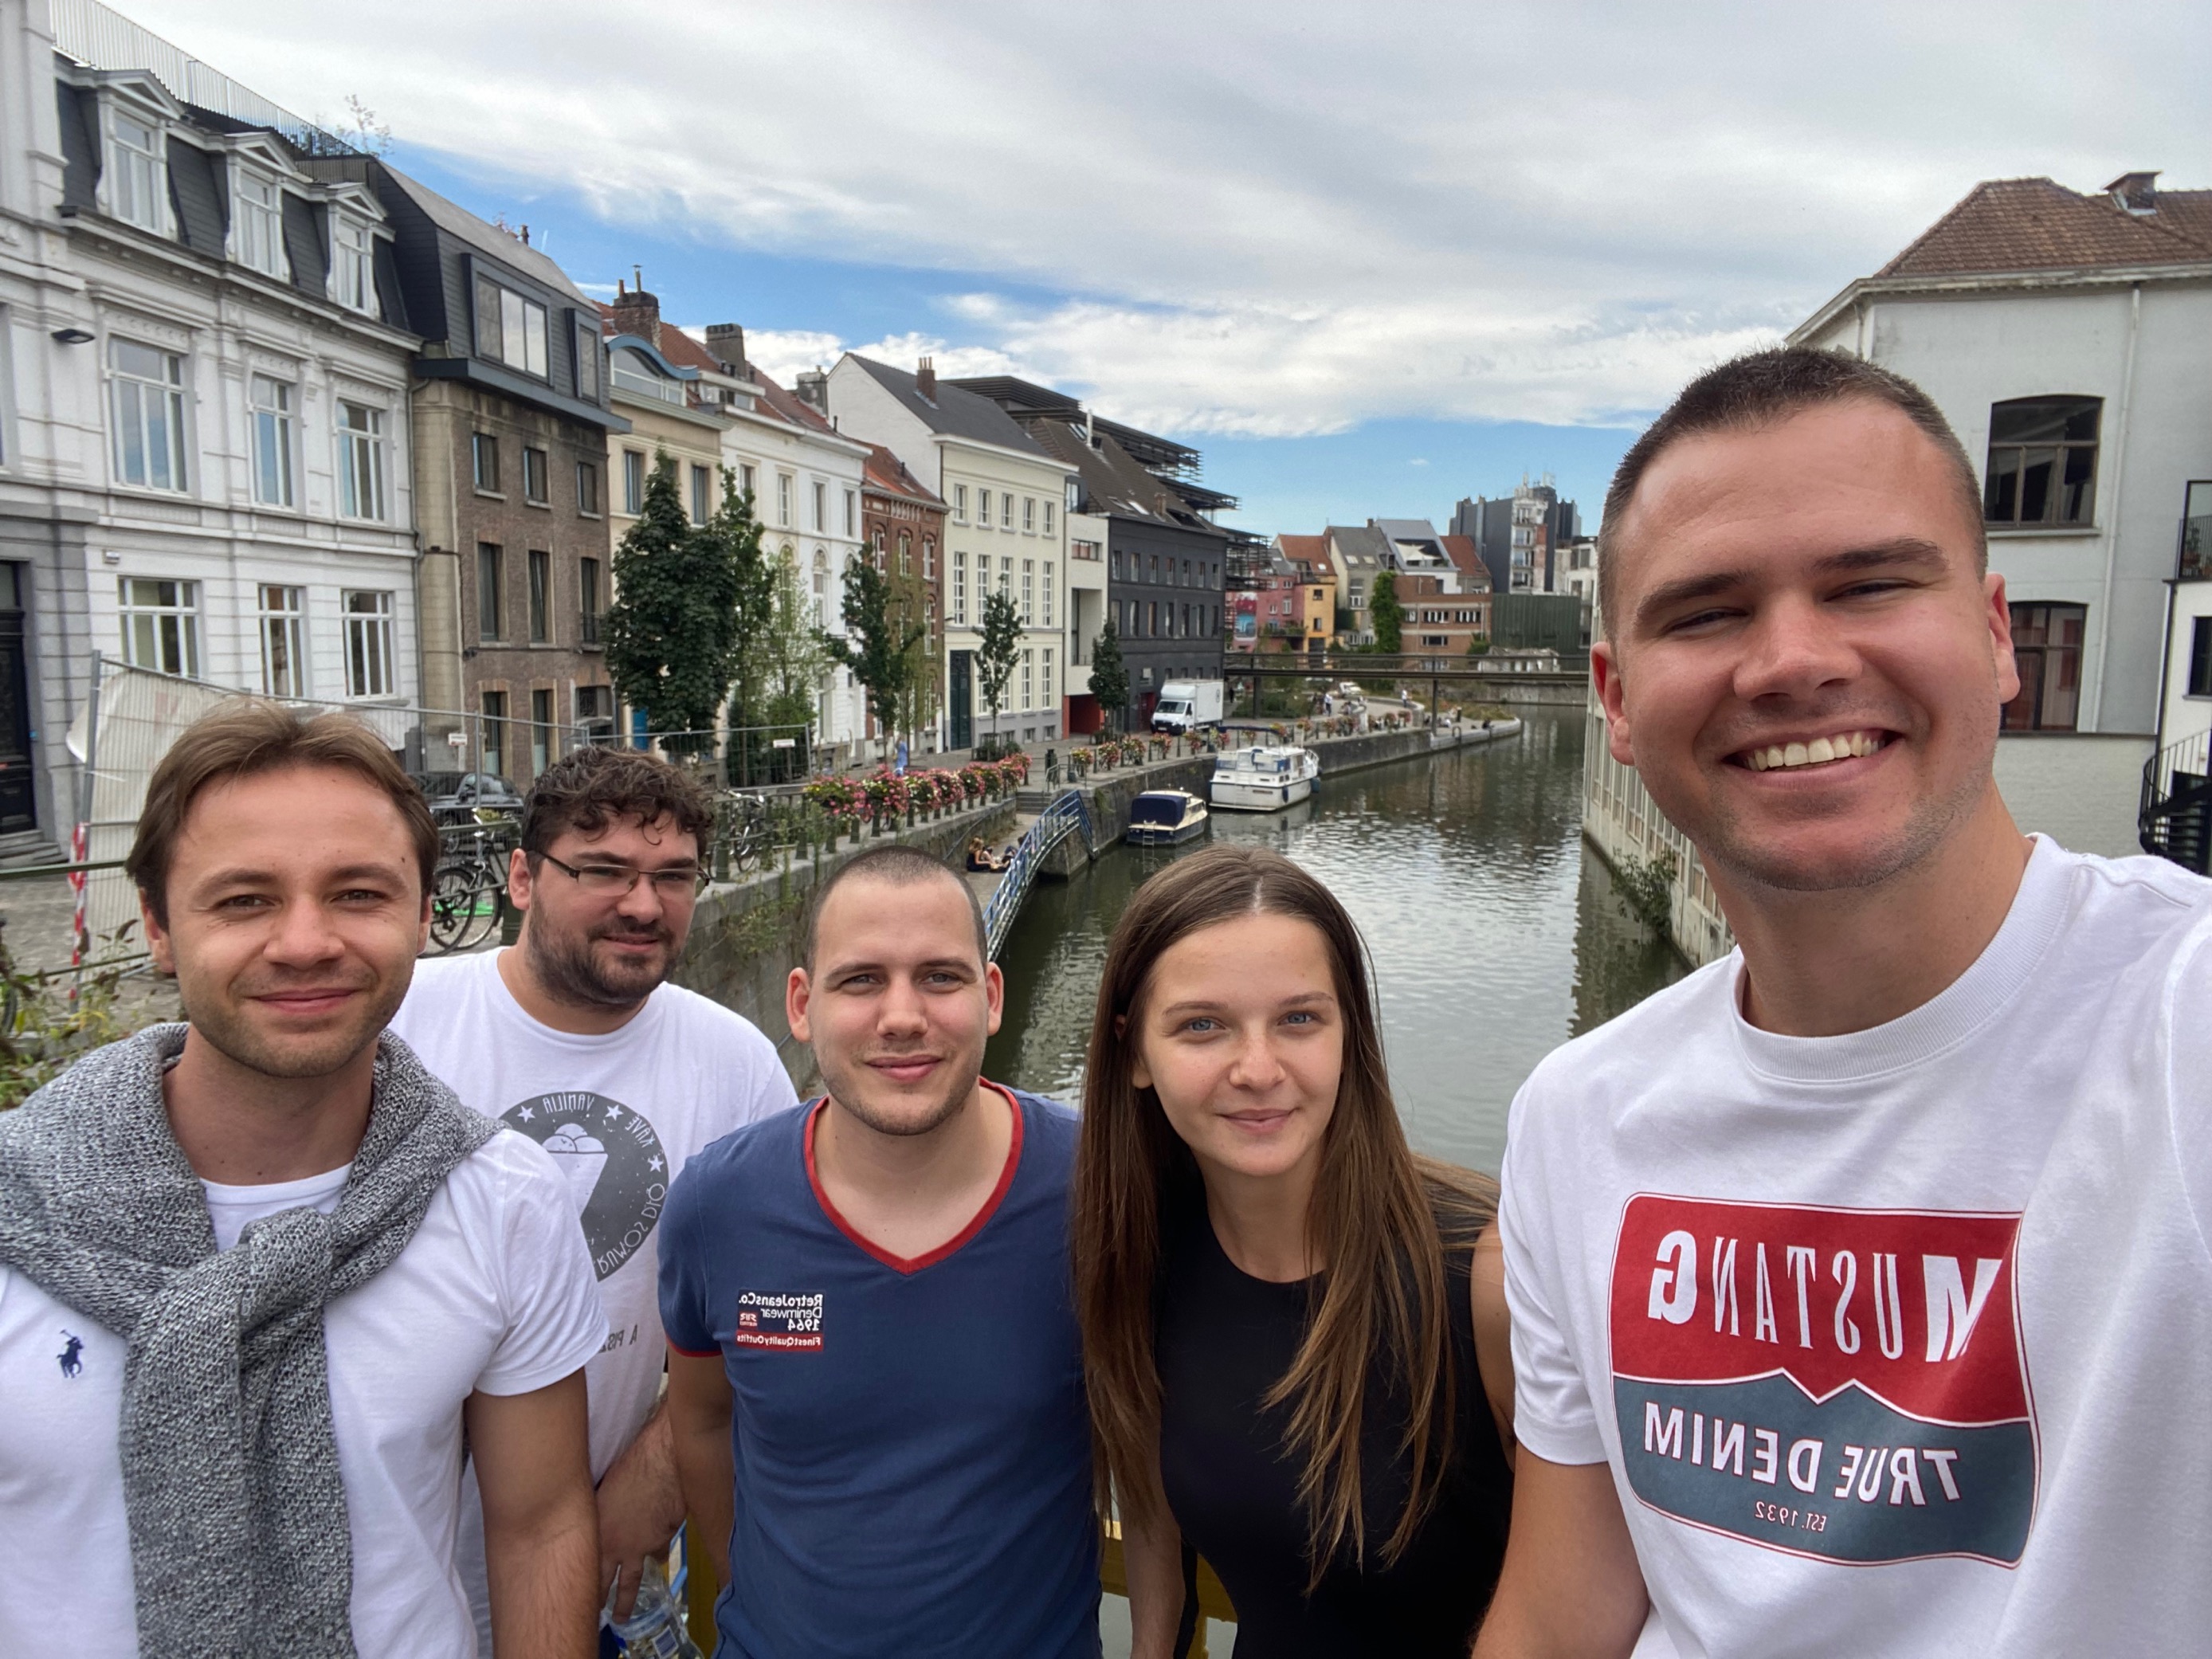 Four new joiners of delaware Hungary and the Hungarian recruiter is smiling in Ghent in the beginning of the annual Belgian Analyst Bootcamp